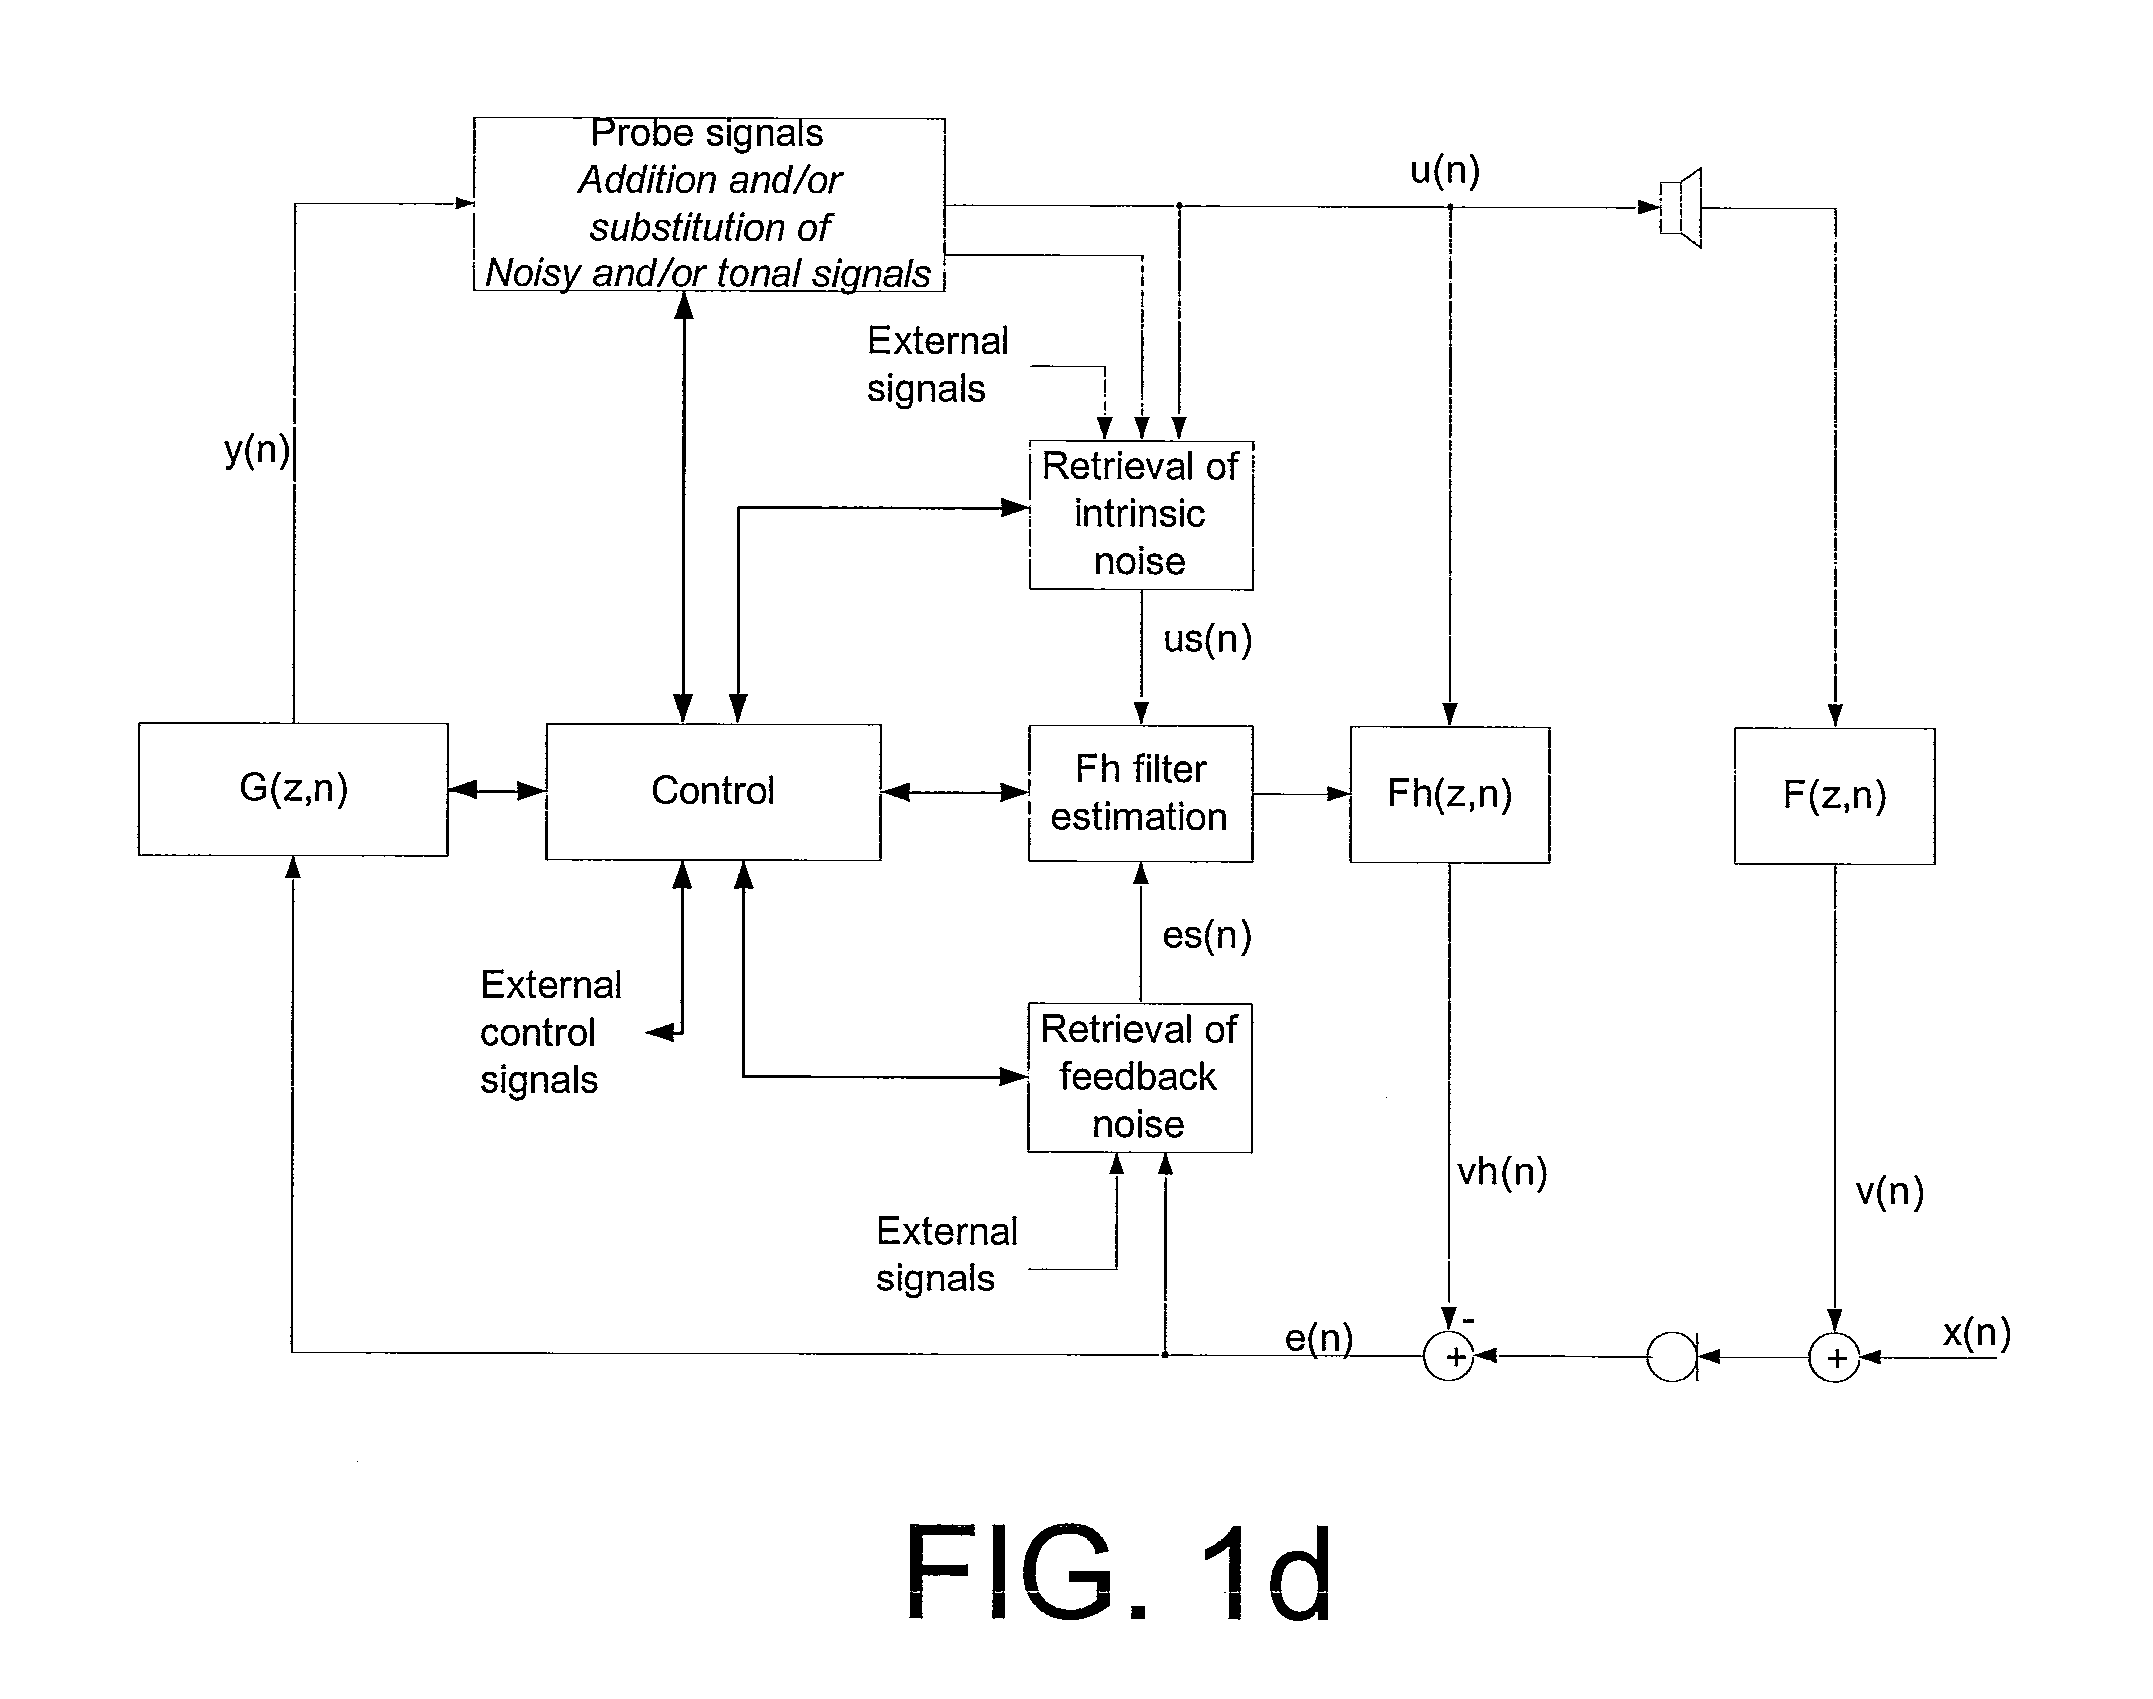 Adaptive feedback cancellation based on inserted and/or intrinsic characteristics and matched retrieval